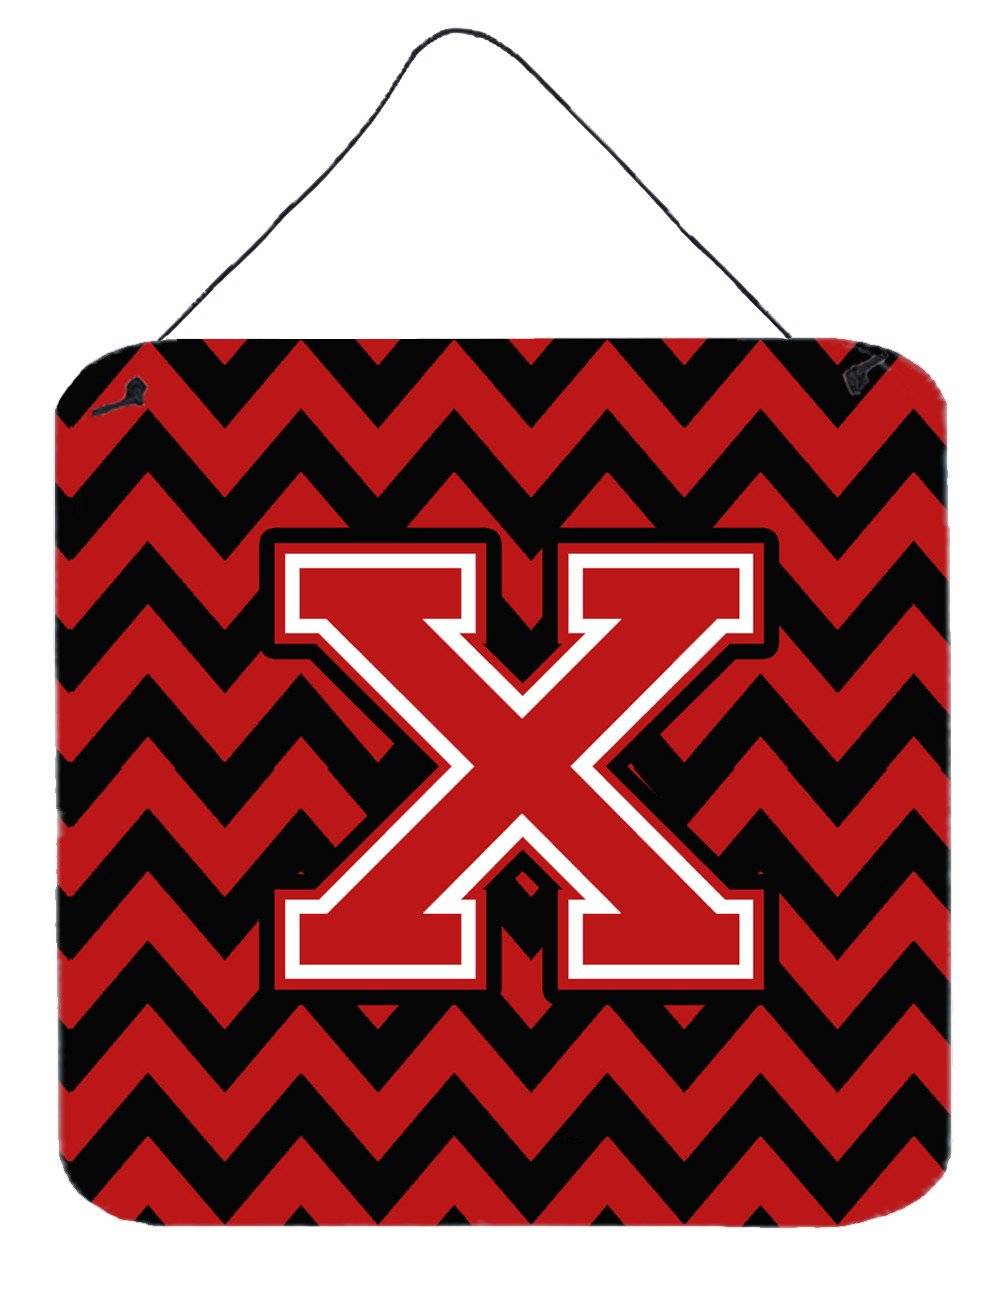 Letter X Chevron Black and Red   Wall or Door Hanging Prints CJ1047-XDS66 by Caroline's Treasures